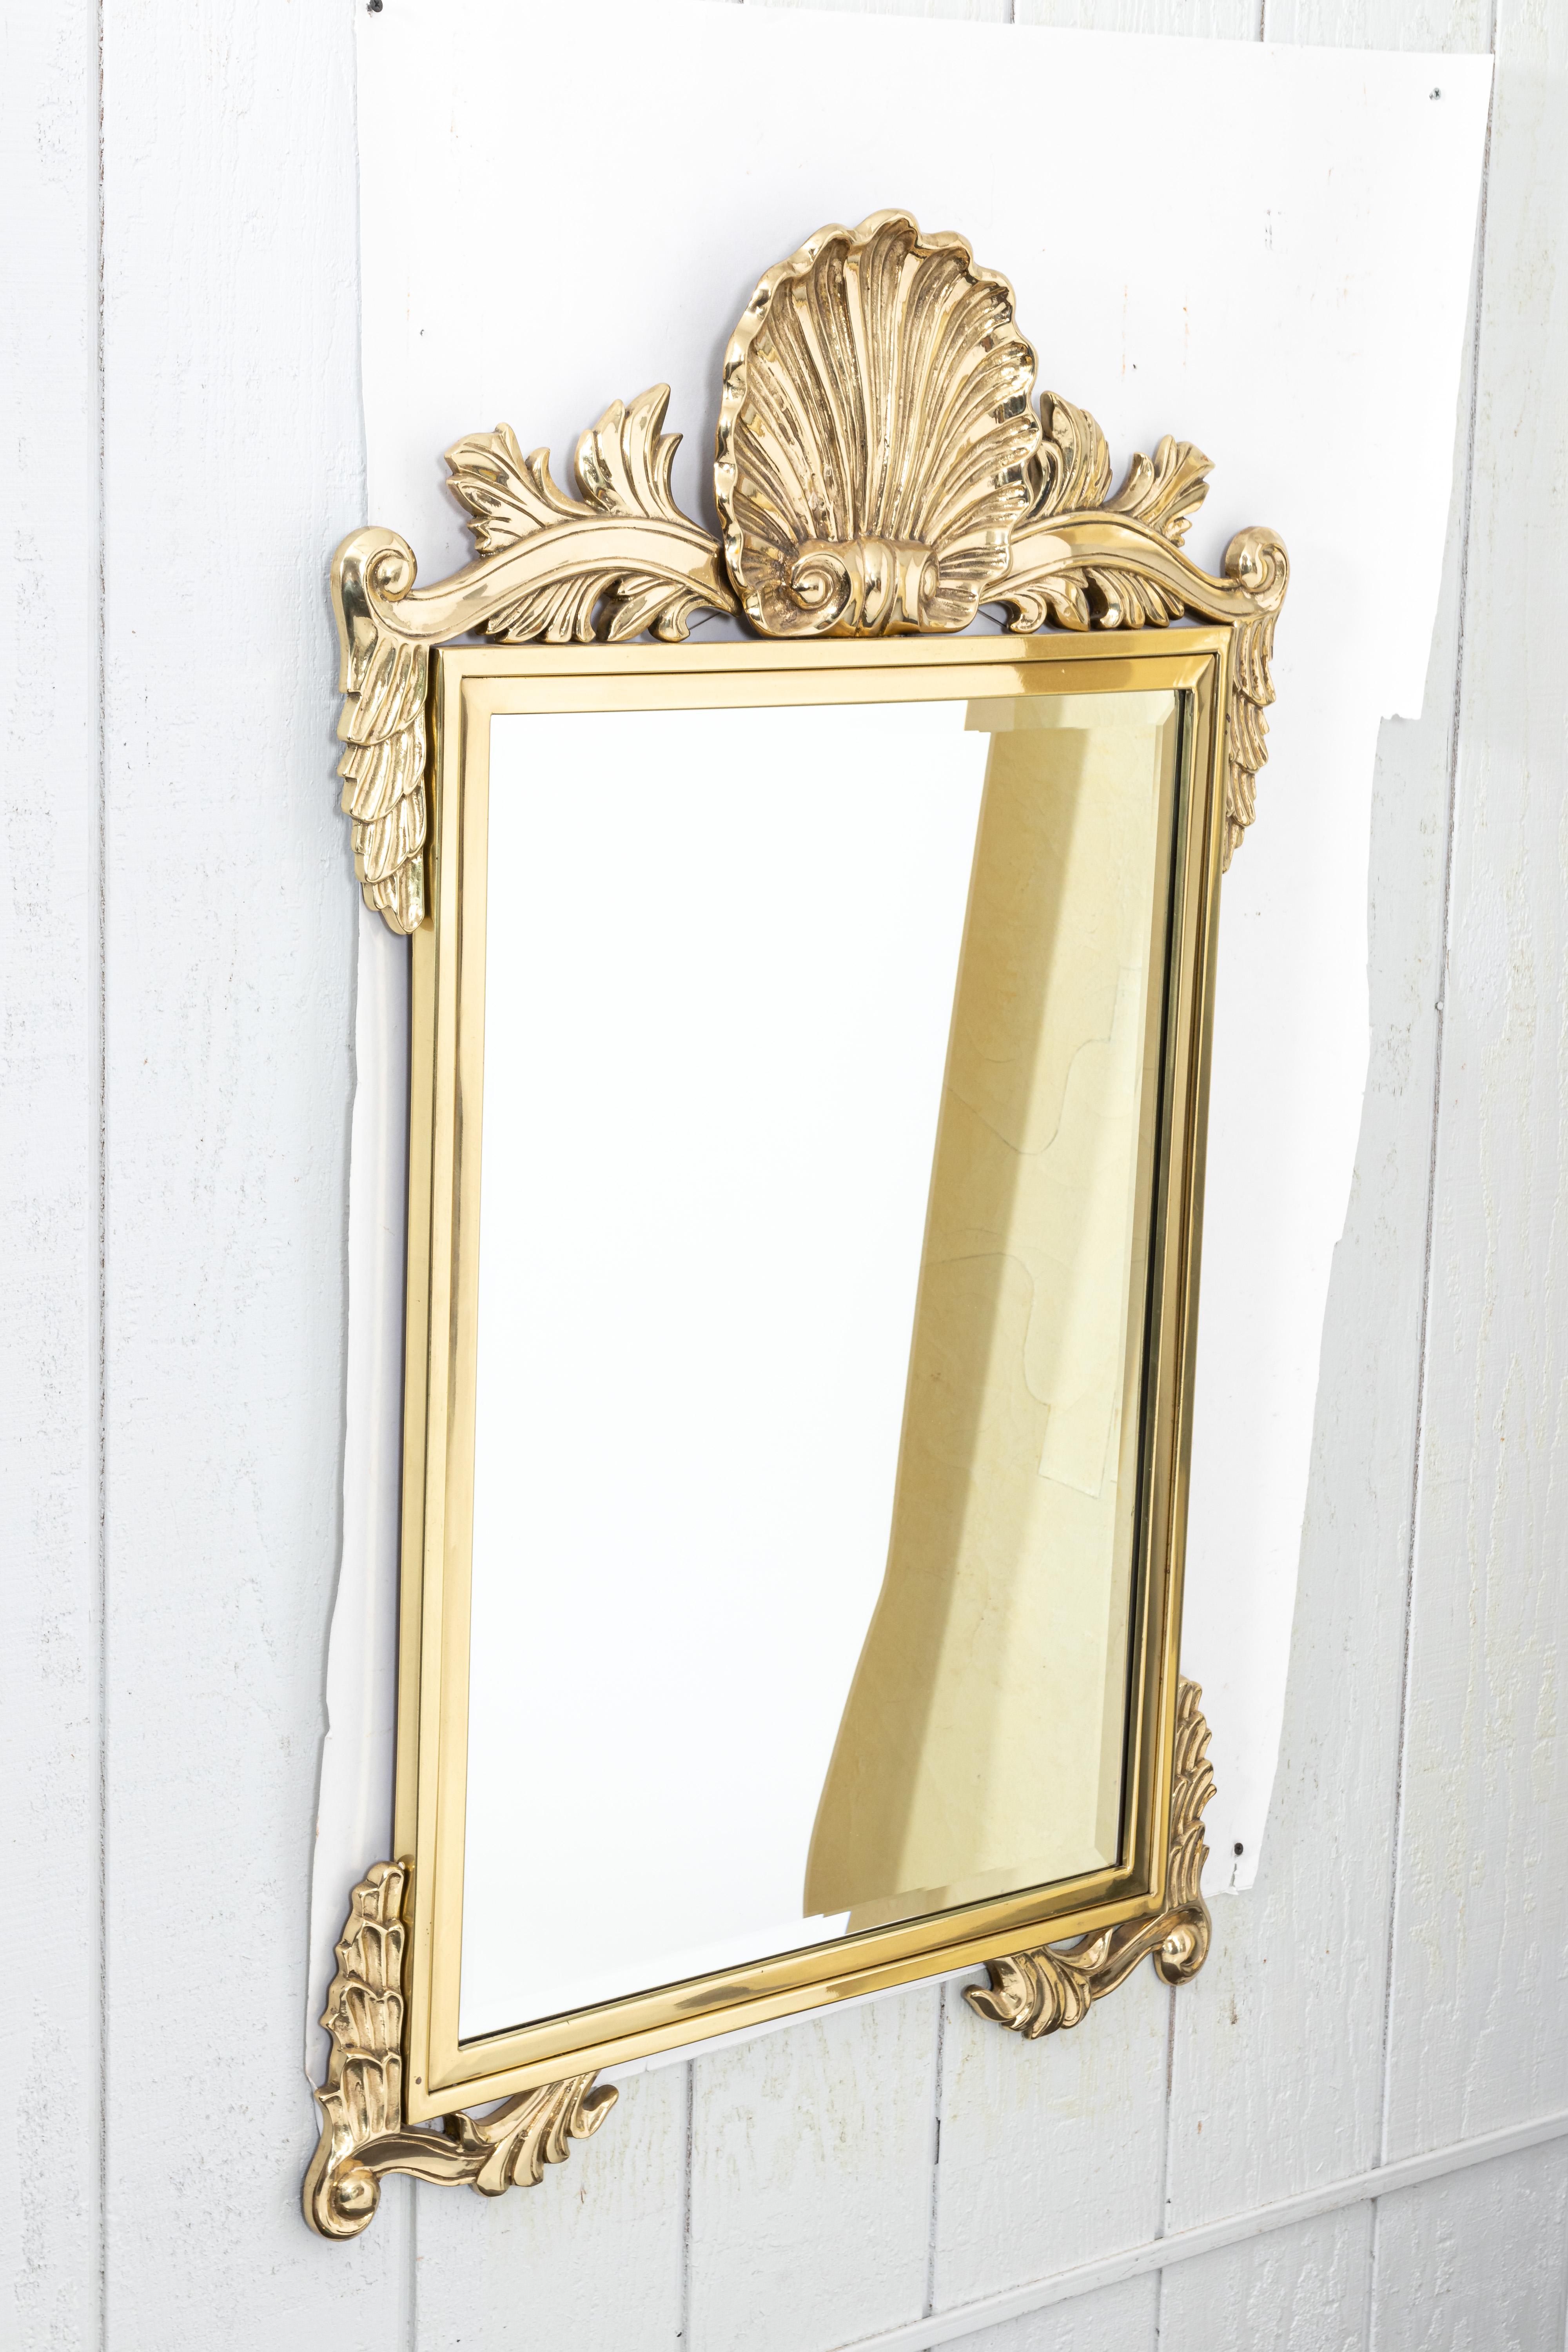 Neoclassical Revival Large Solid Brass Shell Motif Beveled Mirror